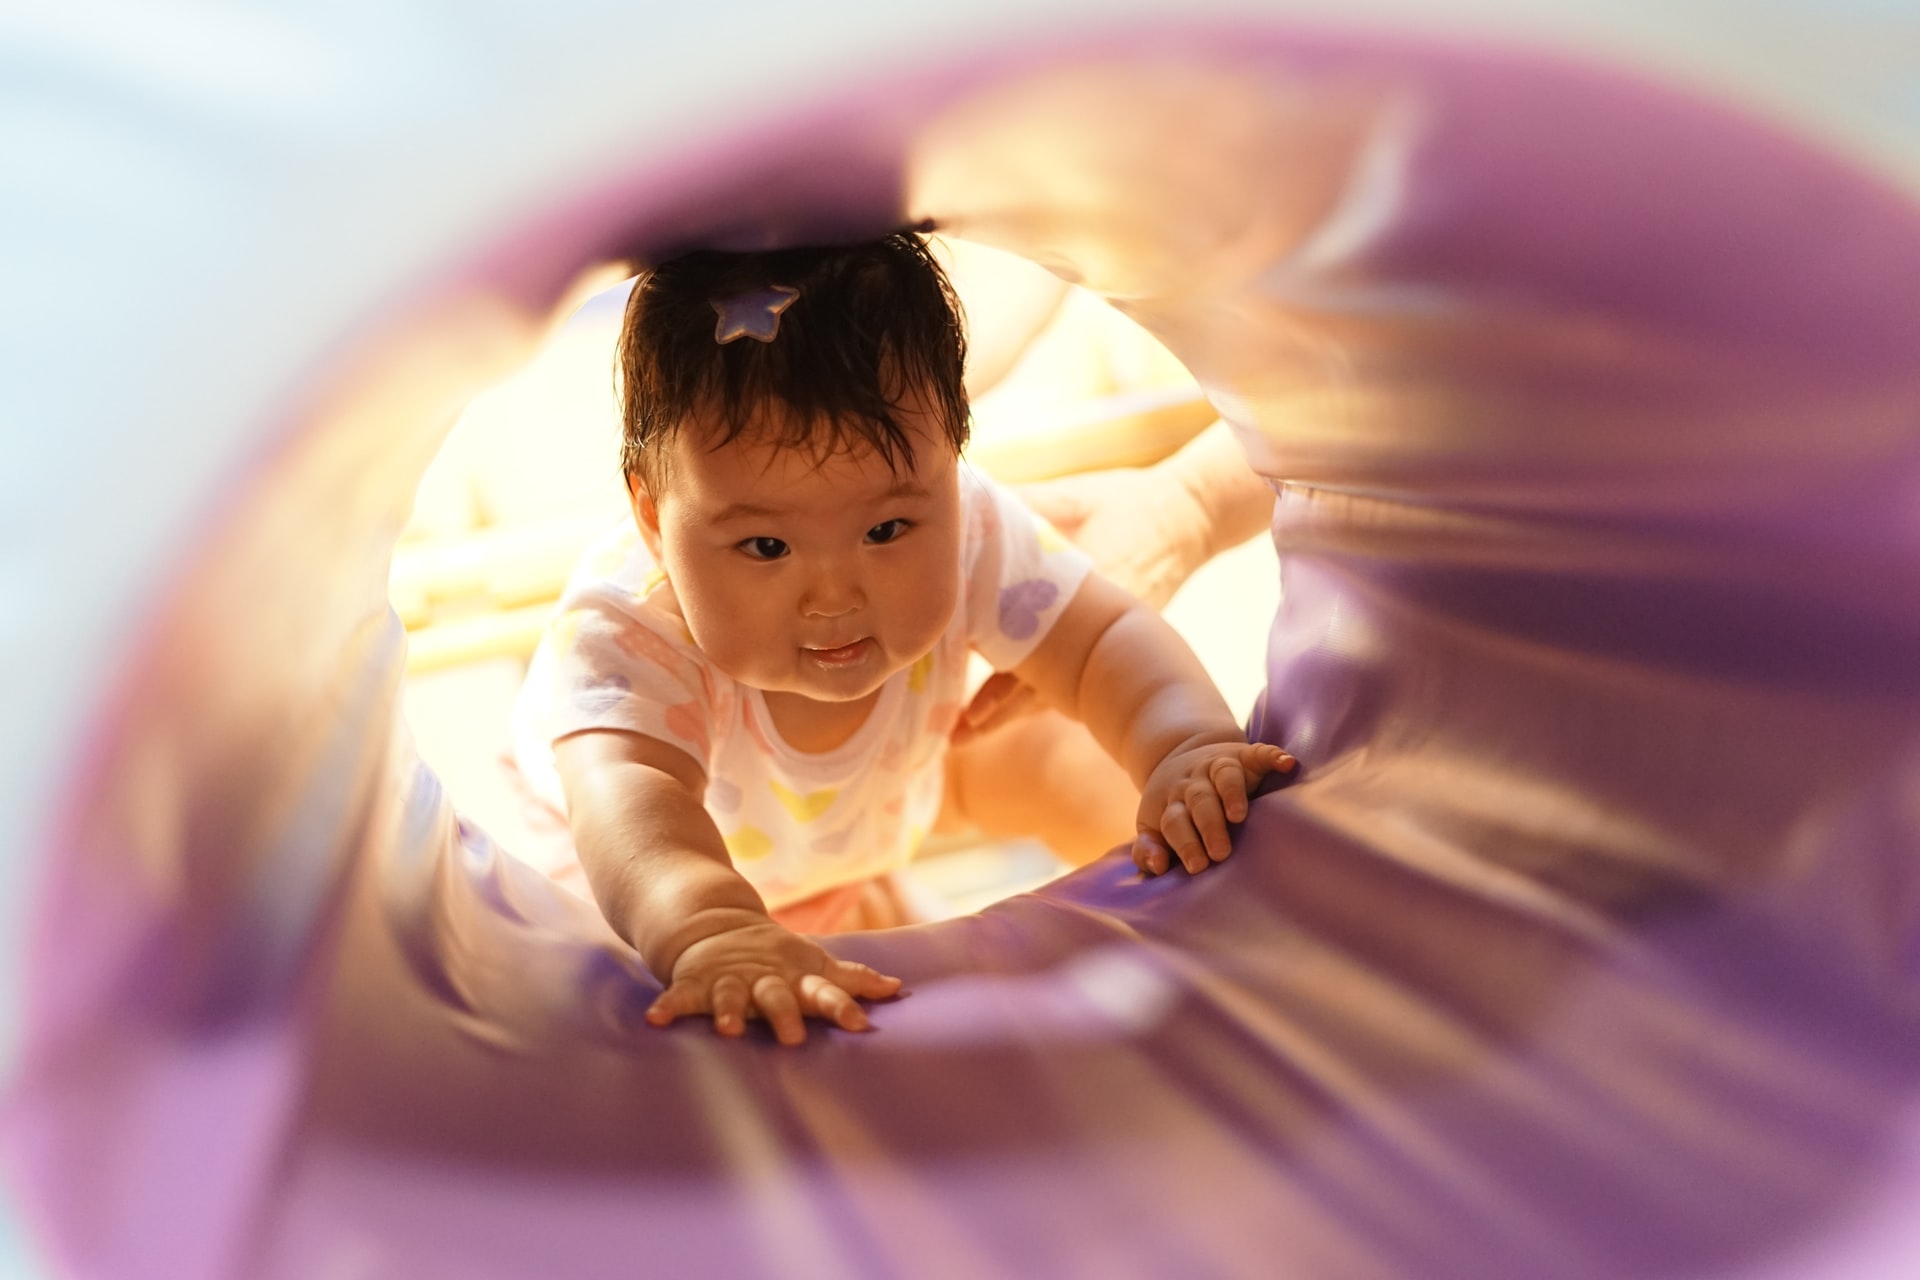 A photo of a baby peering inside a pink play tunnel